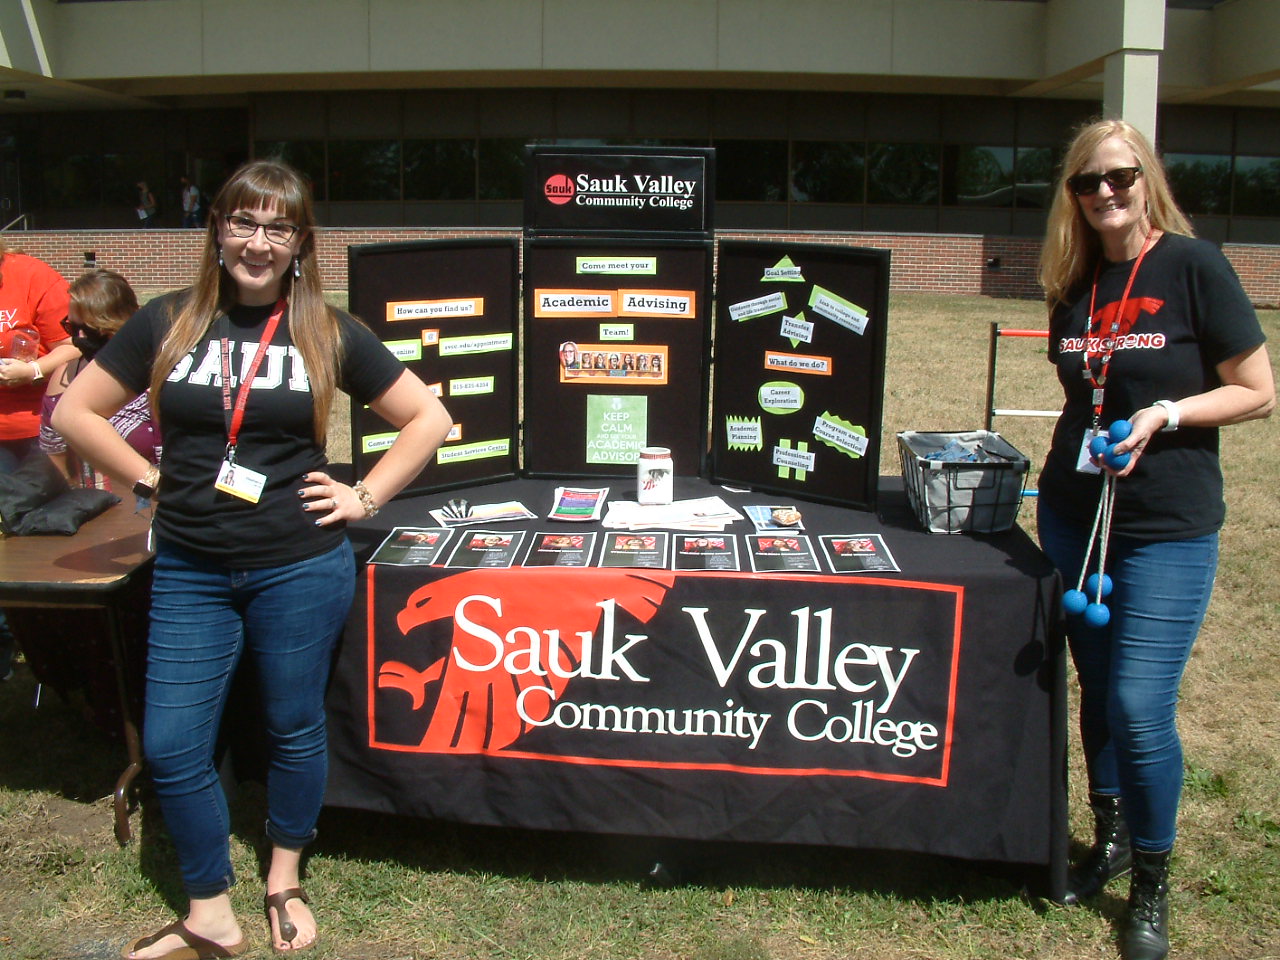 Academic-advisor-Stephanie-Jacobs-academic-counselor-Valerie-Kern-Lyons-stand-in-front-of-the-SVCC-academic-advising-booth.JPG